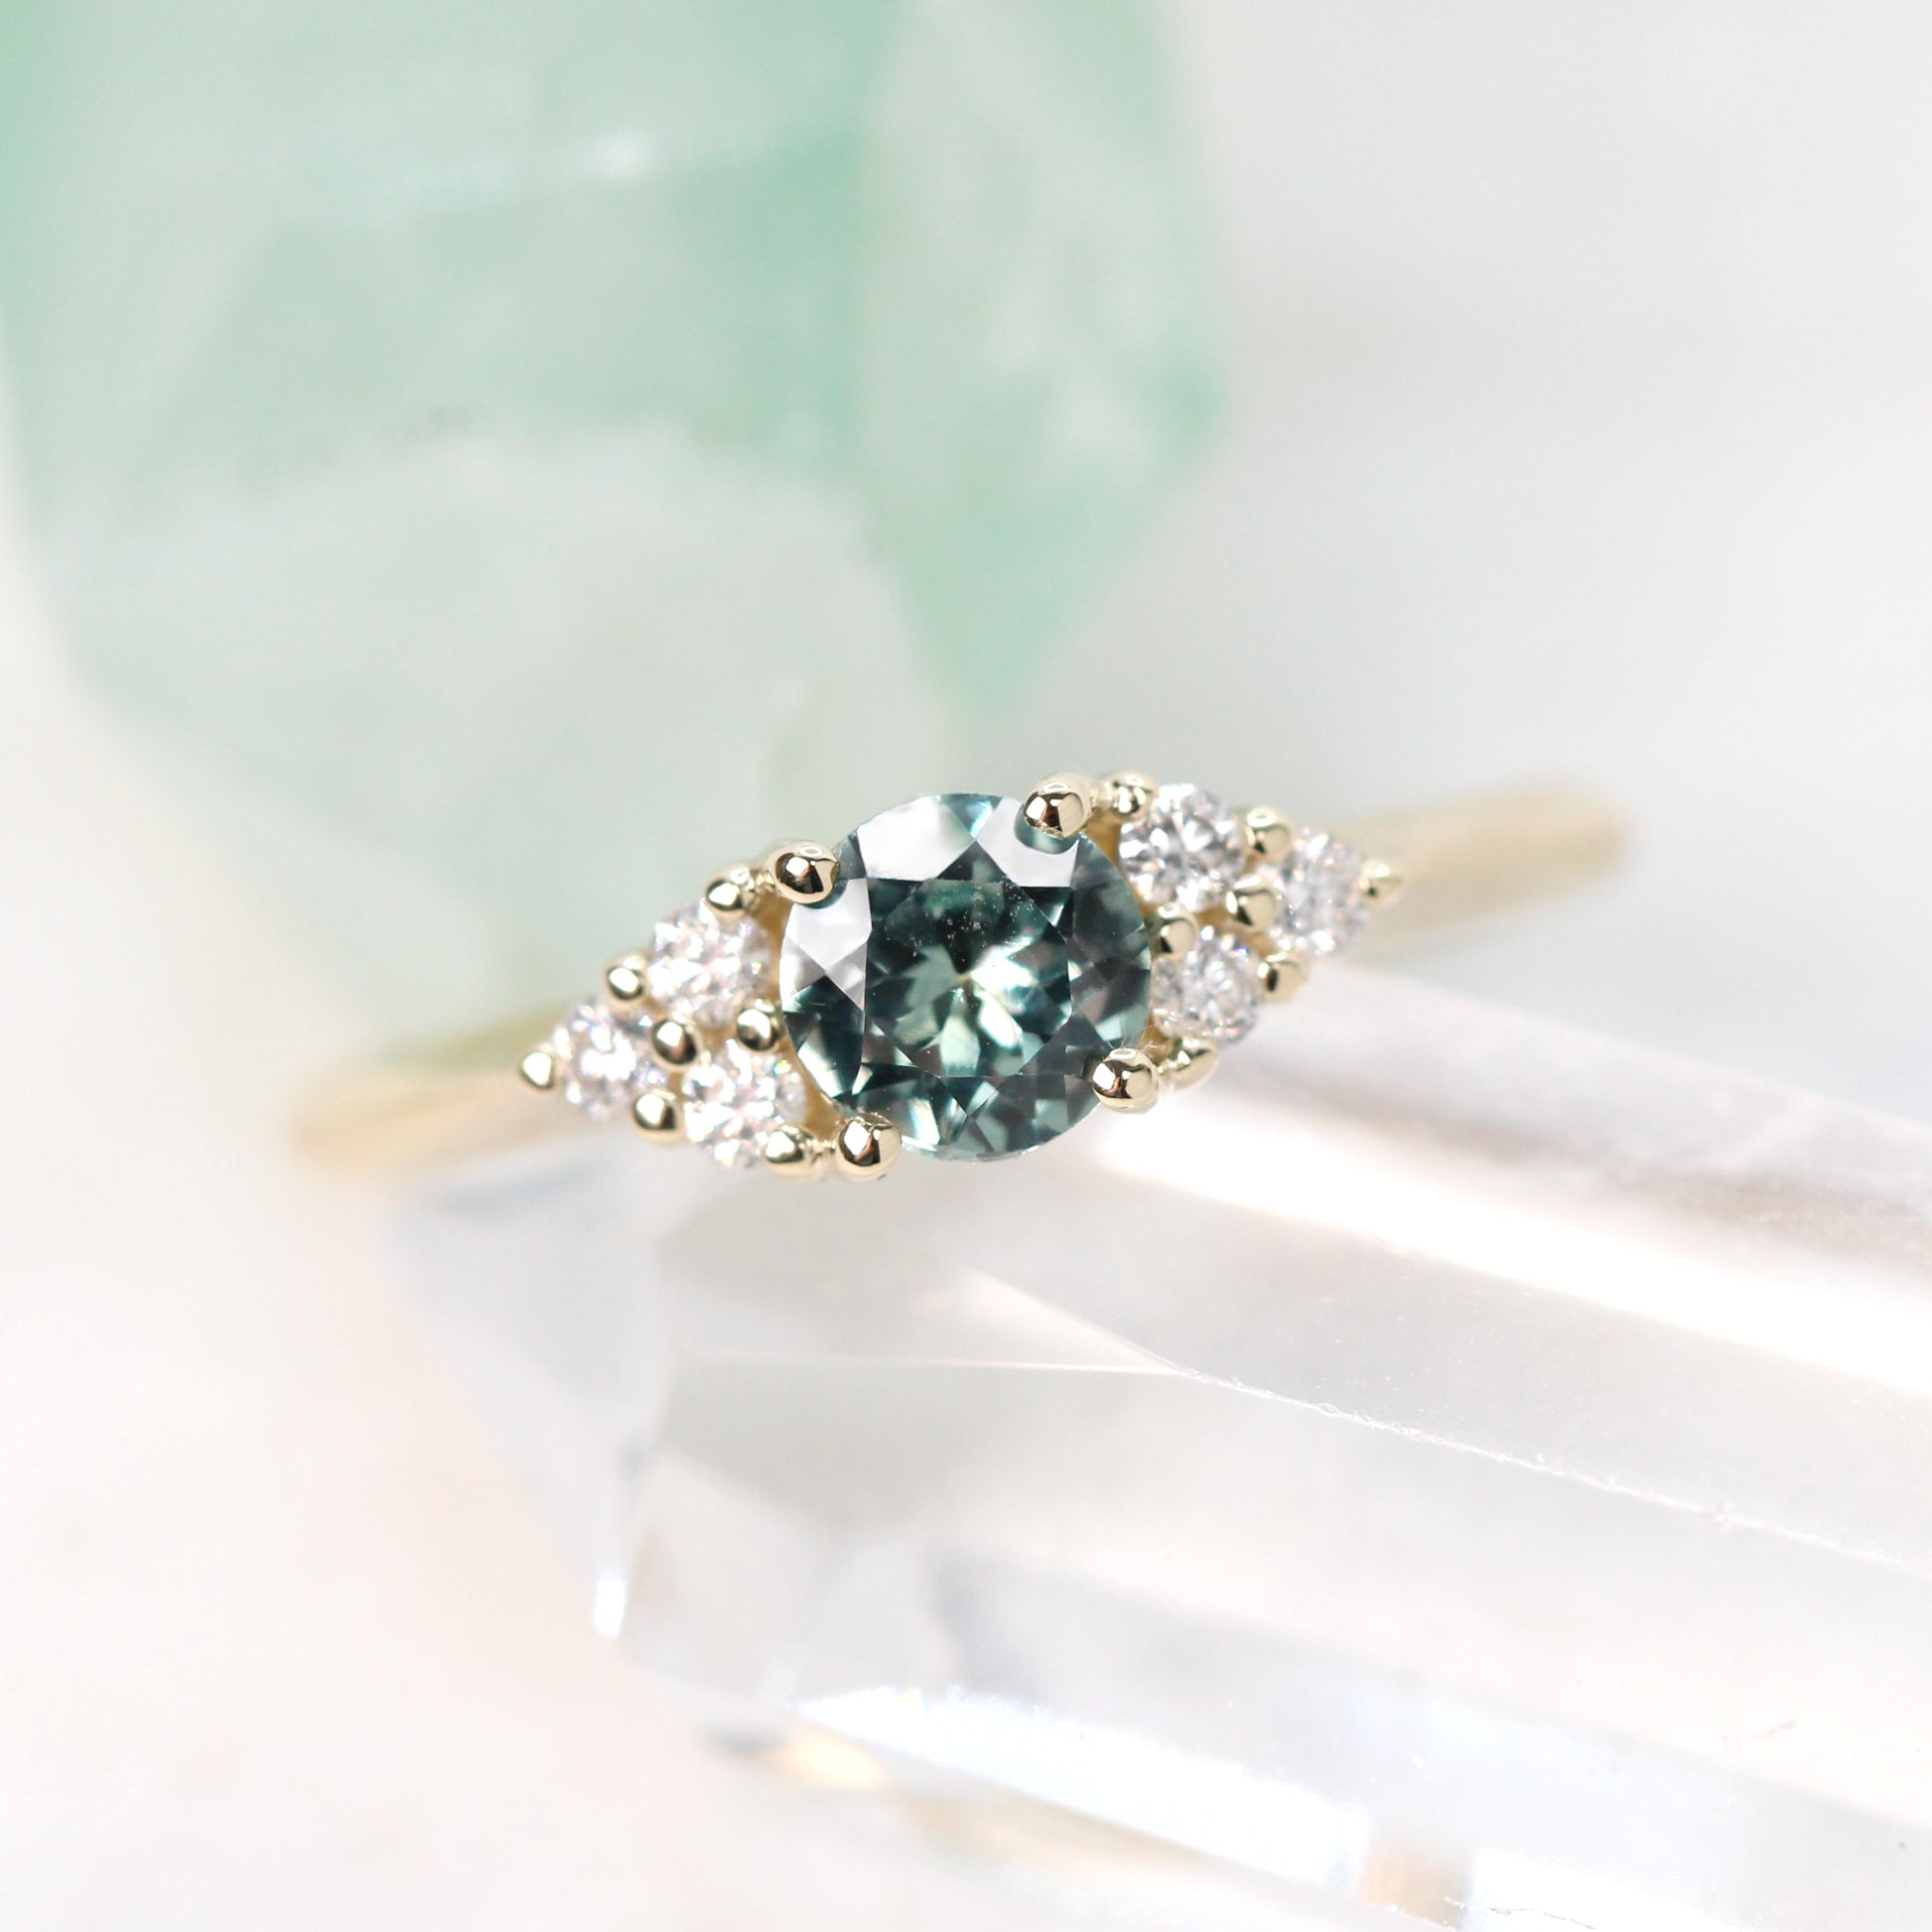 Aster Ring with a 0.57 Carat Light Teal Round Montana Sapphire and White Accent Diamonds in 14k Yellow Gold - Ready to Size and Ship - Midwinter Co. Alternative Bridal Rings and Modern Fine Jewelry